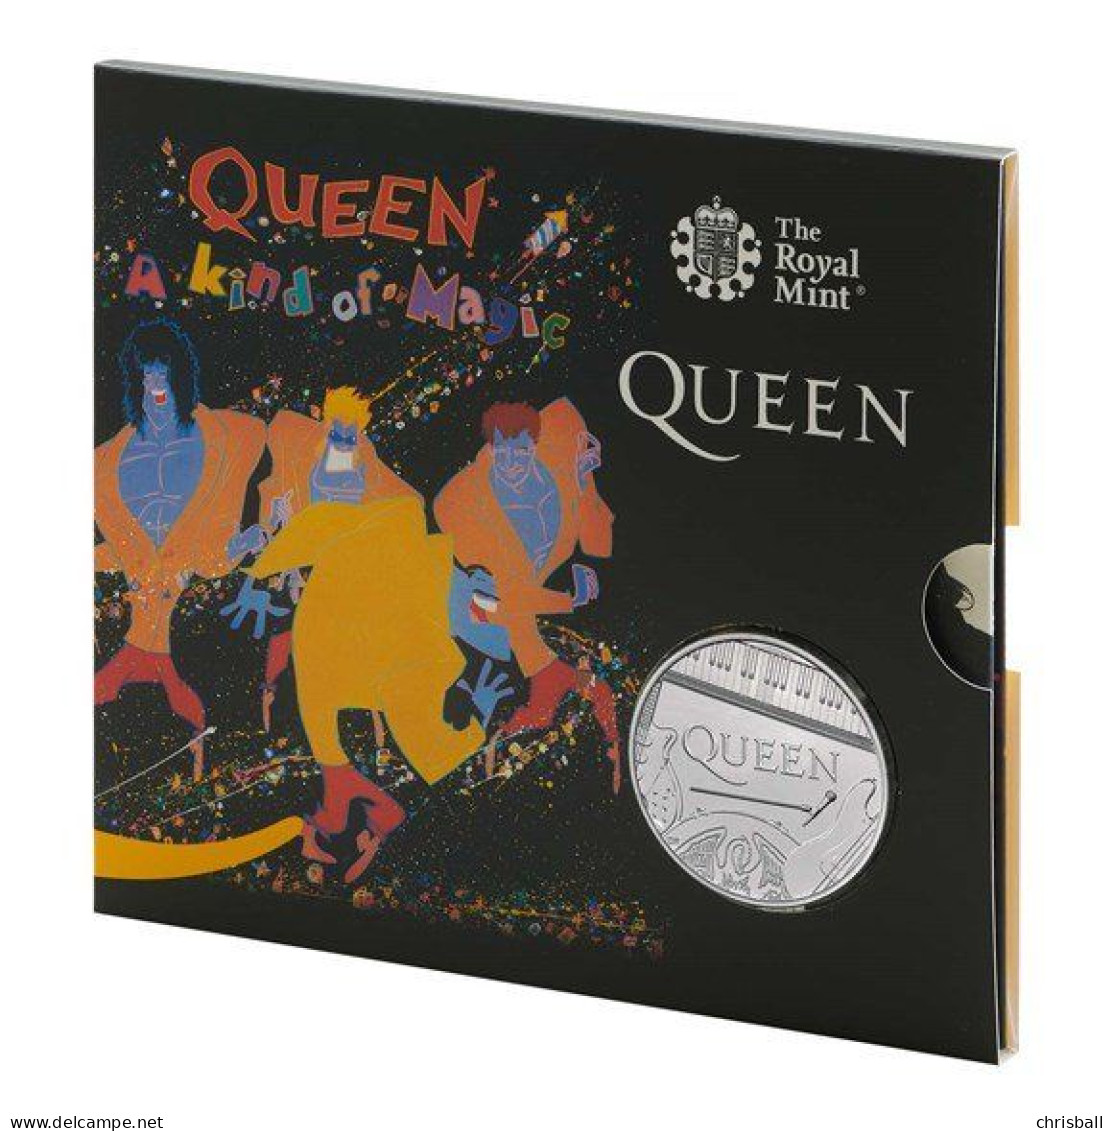 Great Britain UK £5 Five Pound Coin Queen - 2020 Royal Mint Pack - 5 Pounds